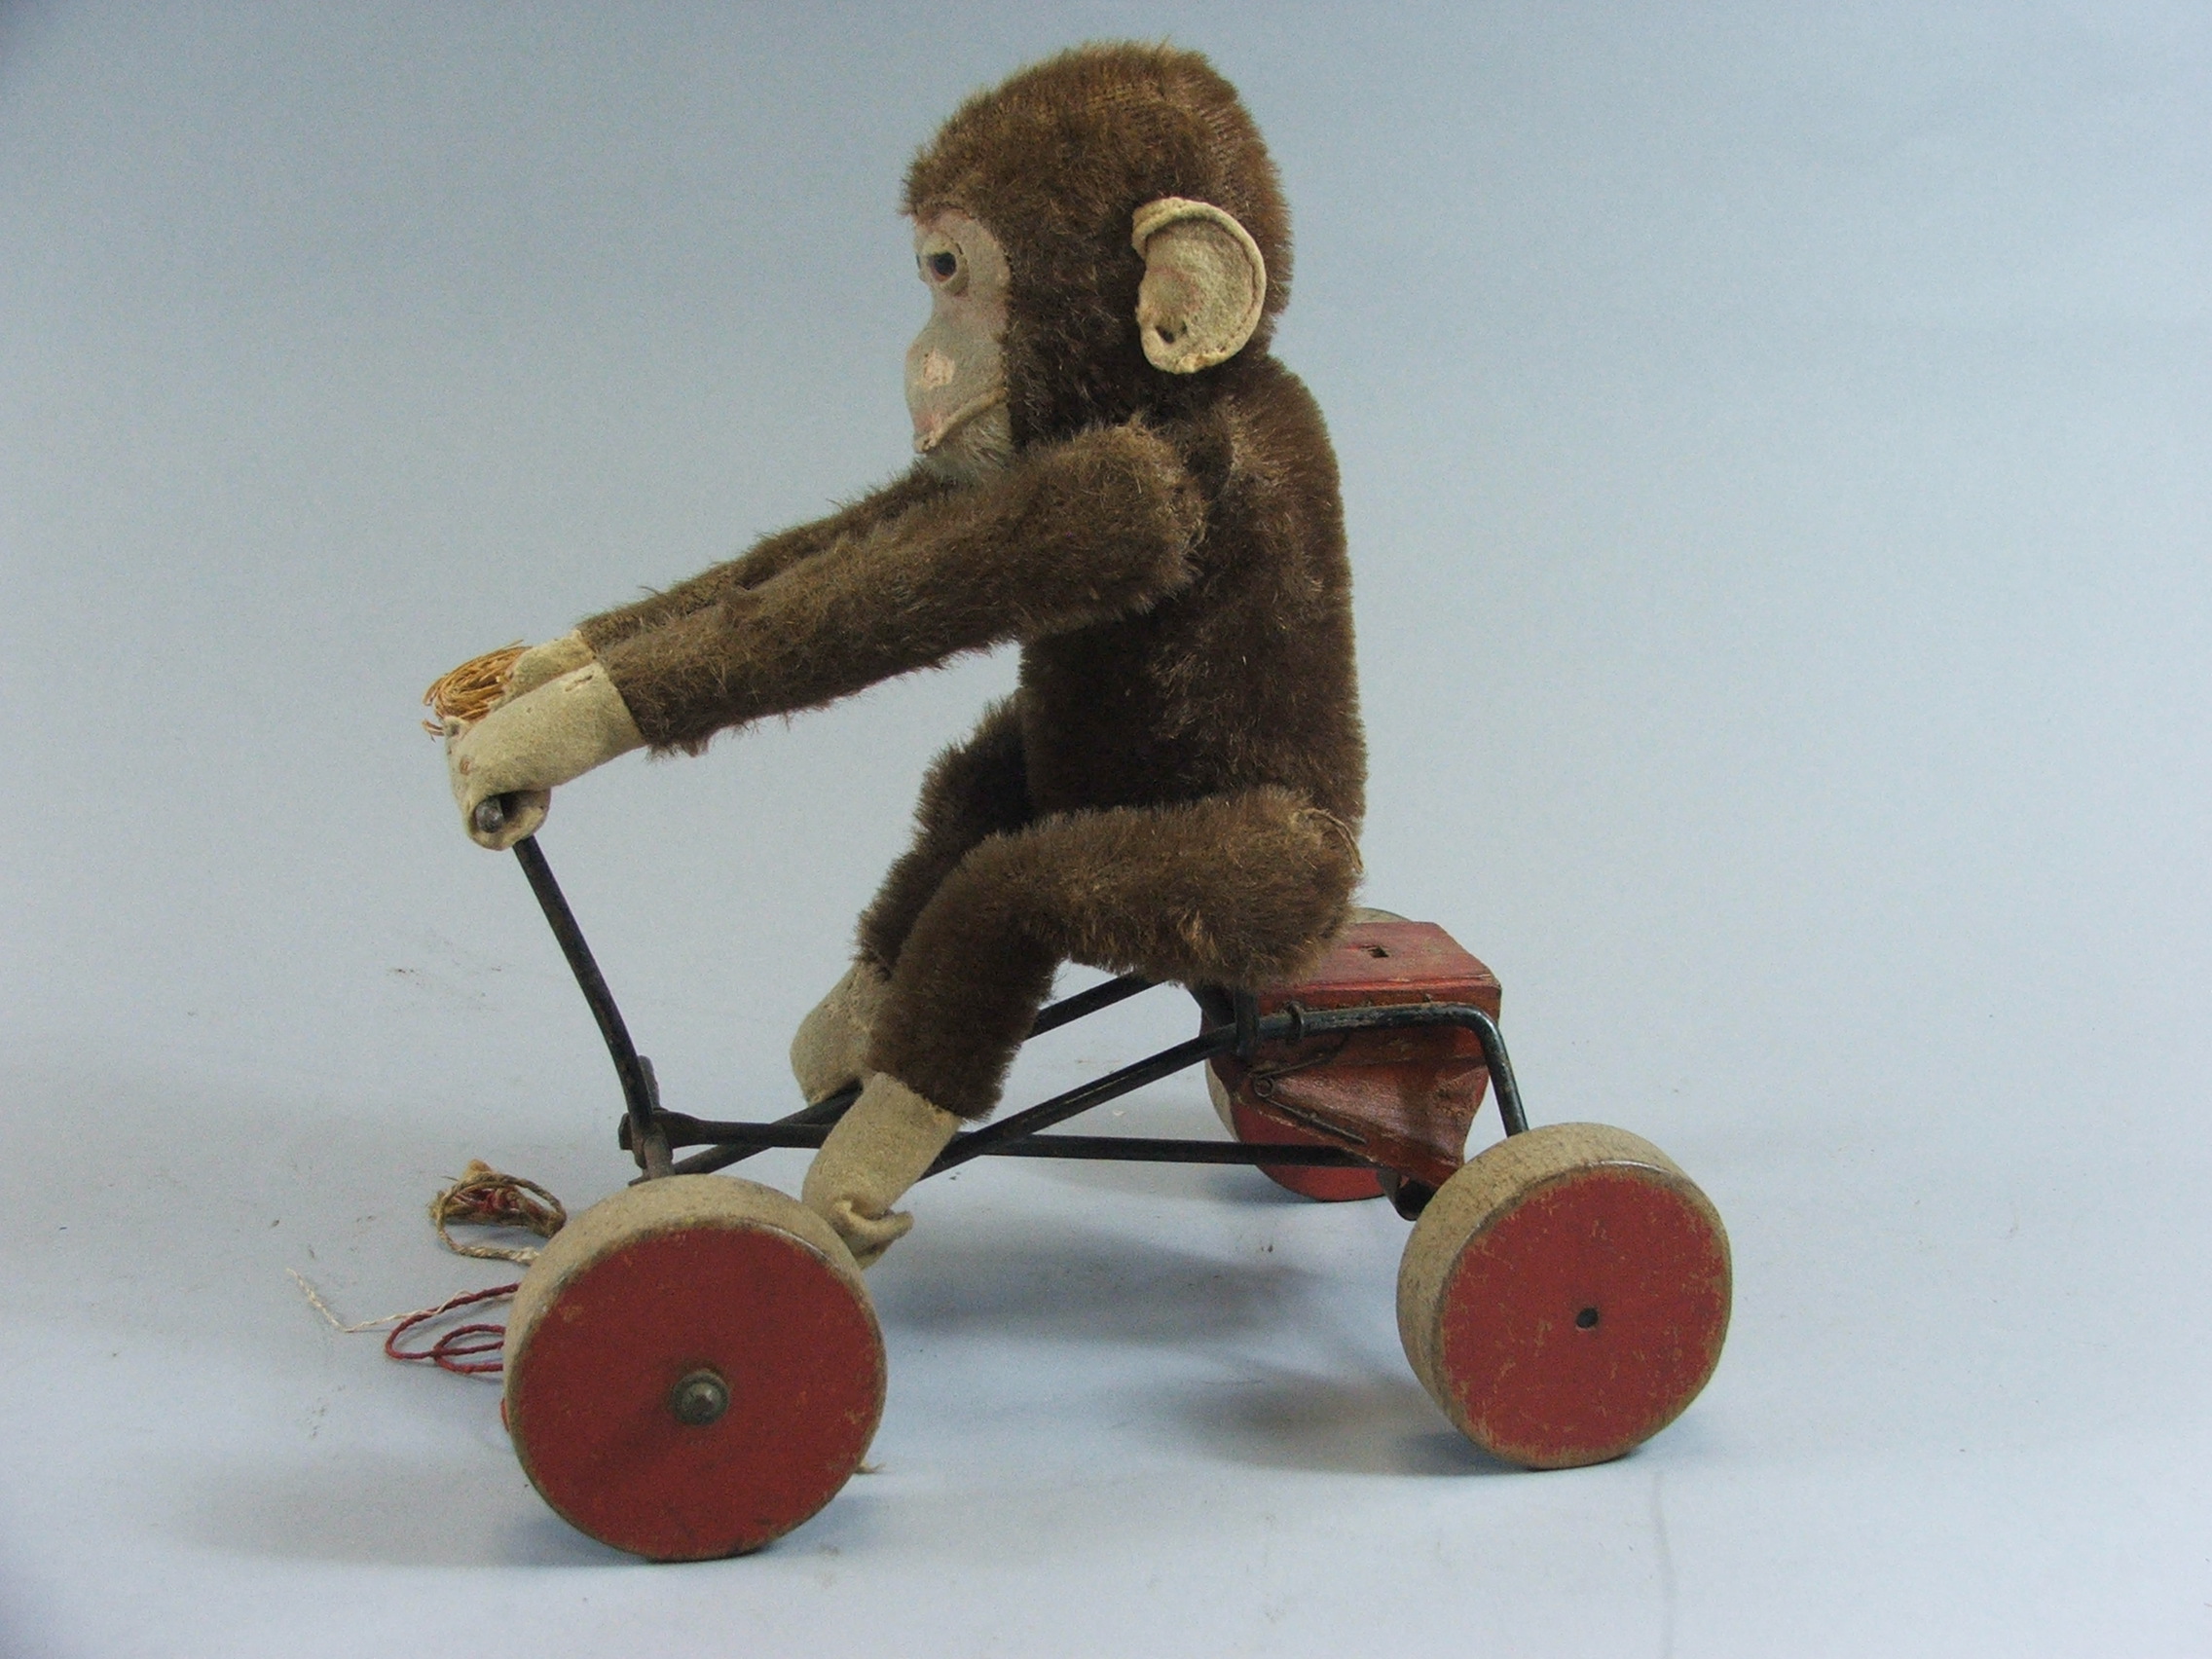 A Childs Pull Along Monkey Toy (Missing One Front Wheel)